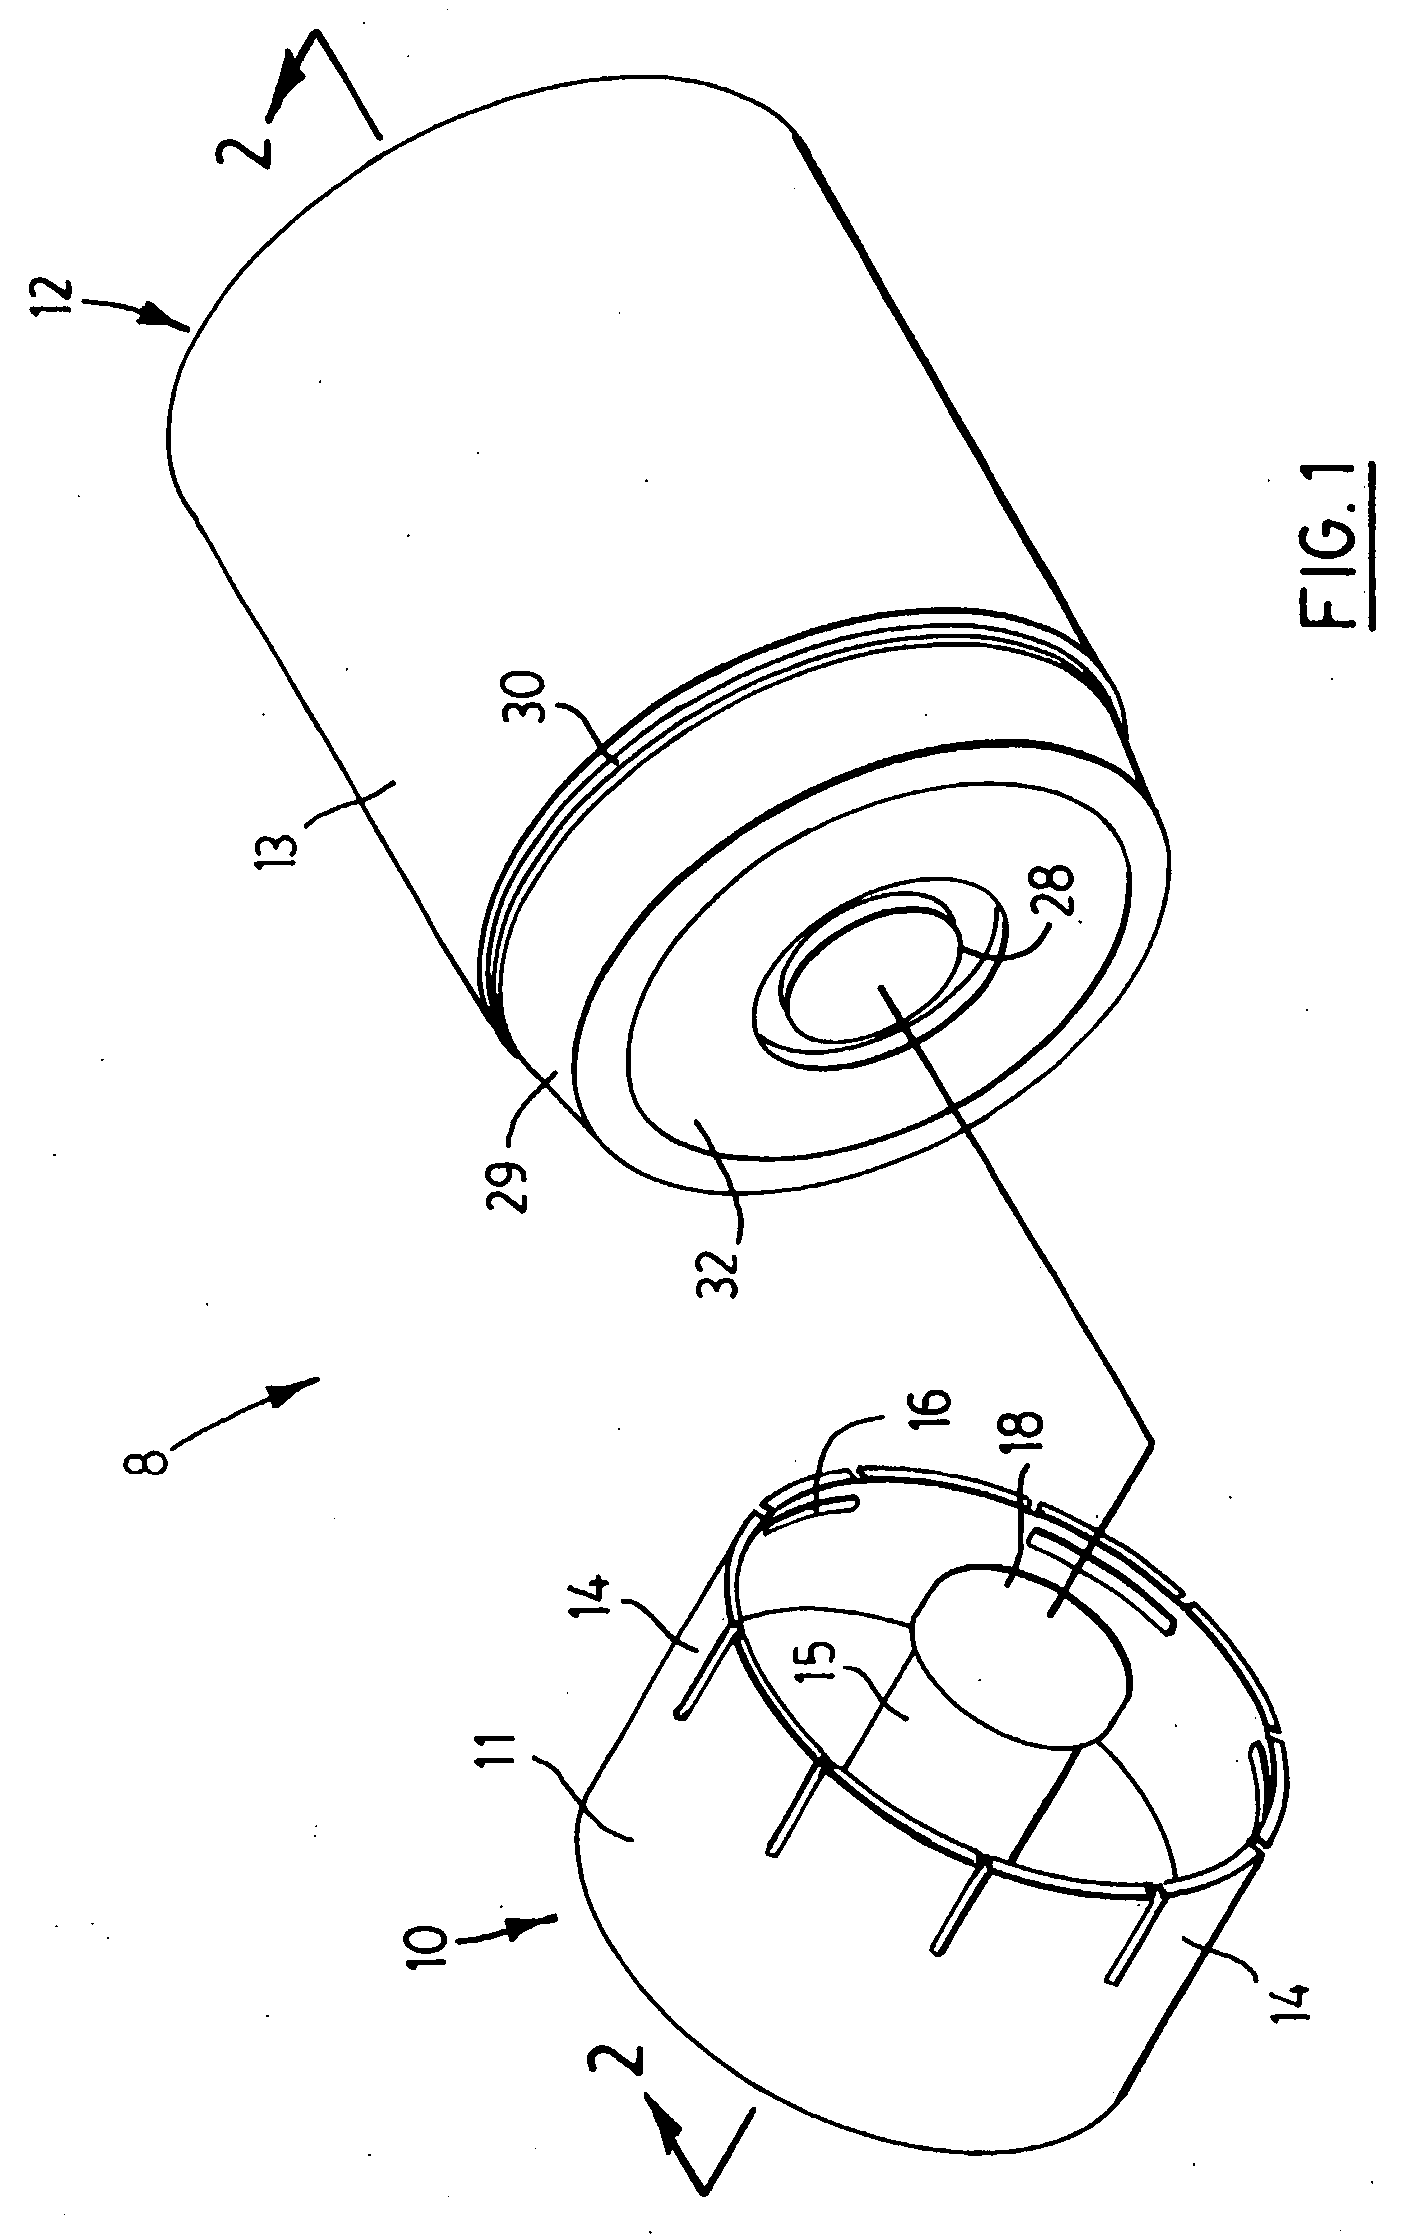 Coupling device for medical lines